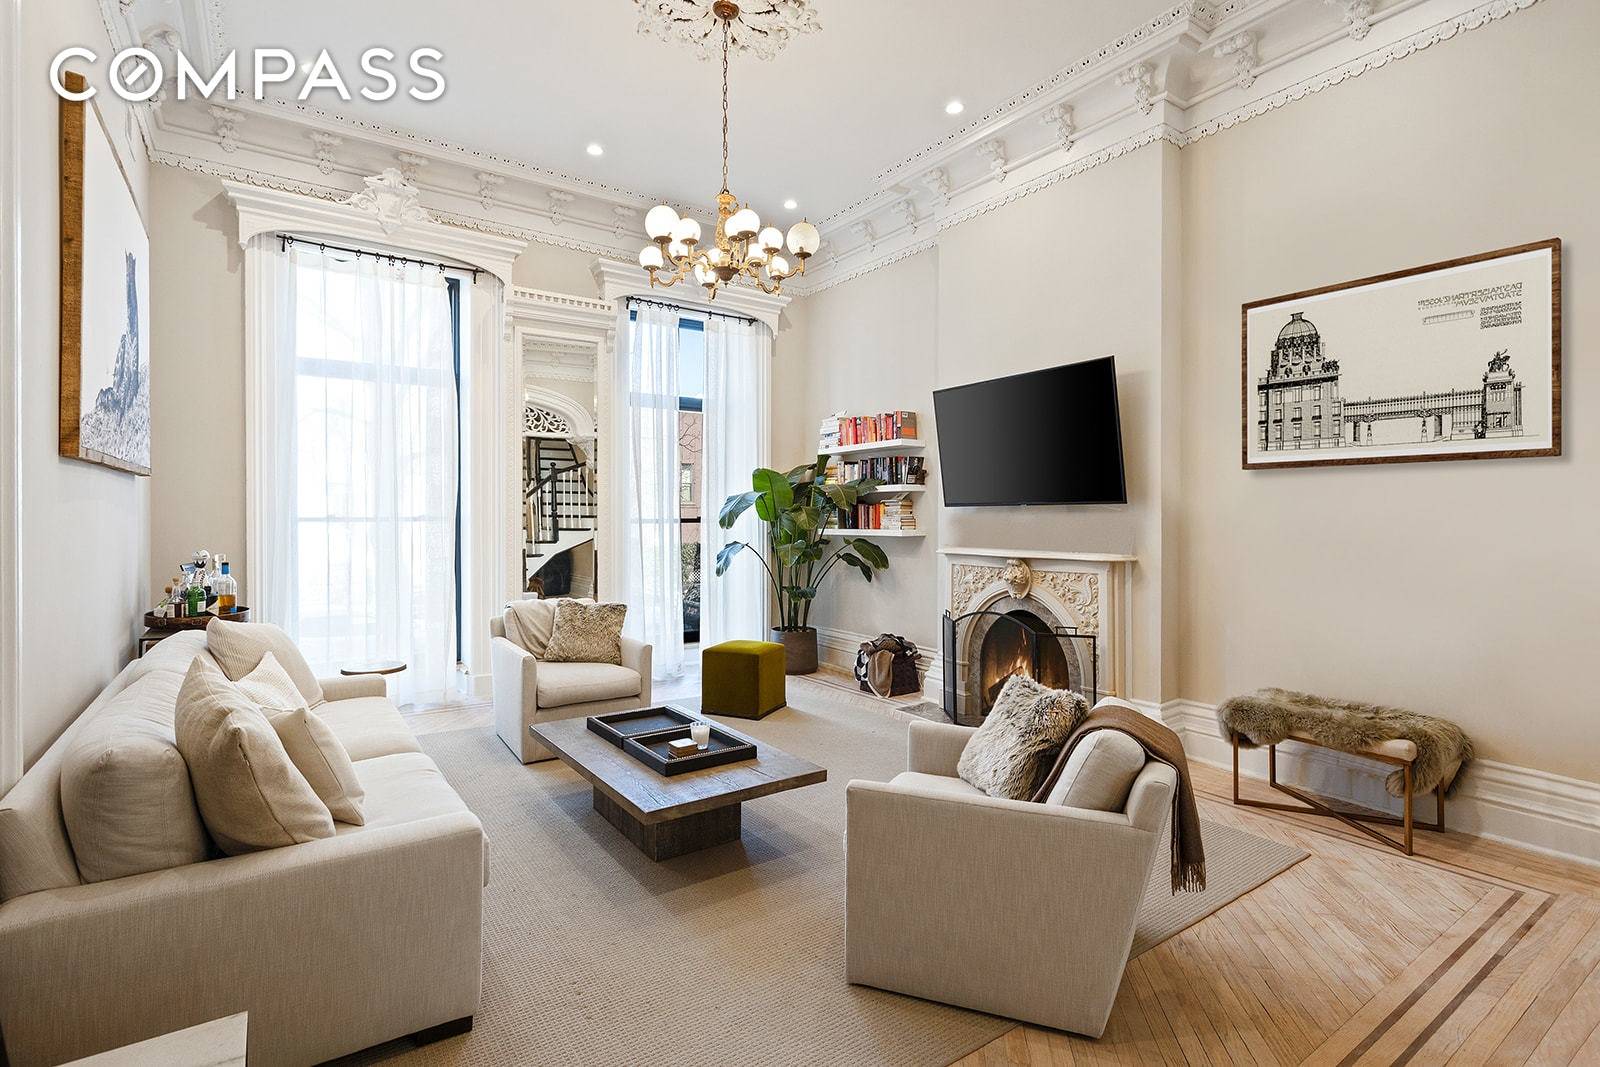 Old world charm meets modern convenience in this phenomenal nearly 3, 000 sq ft duplex apartment.